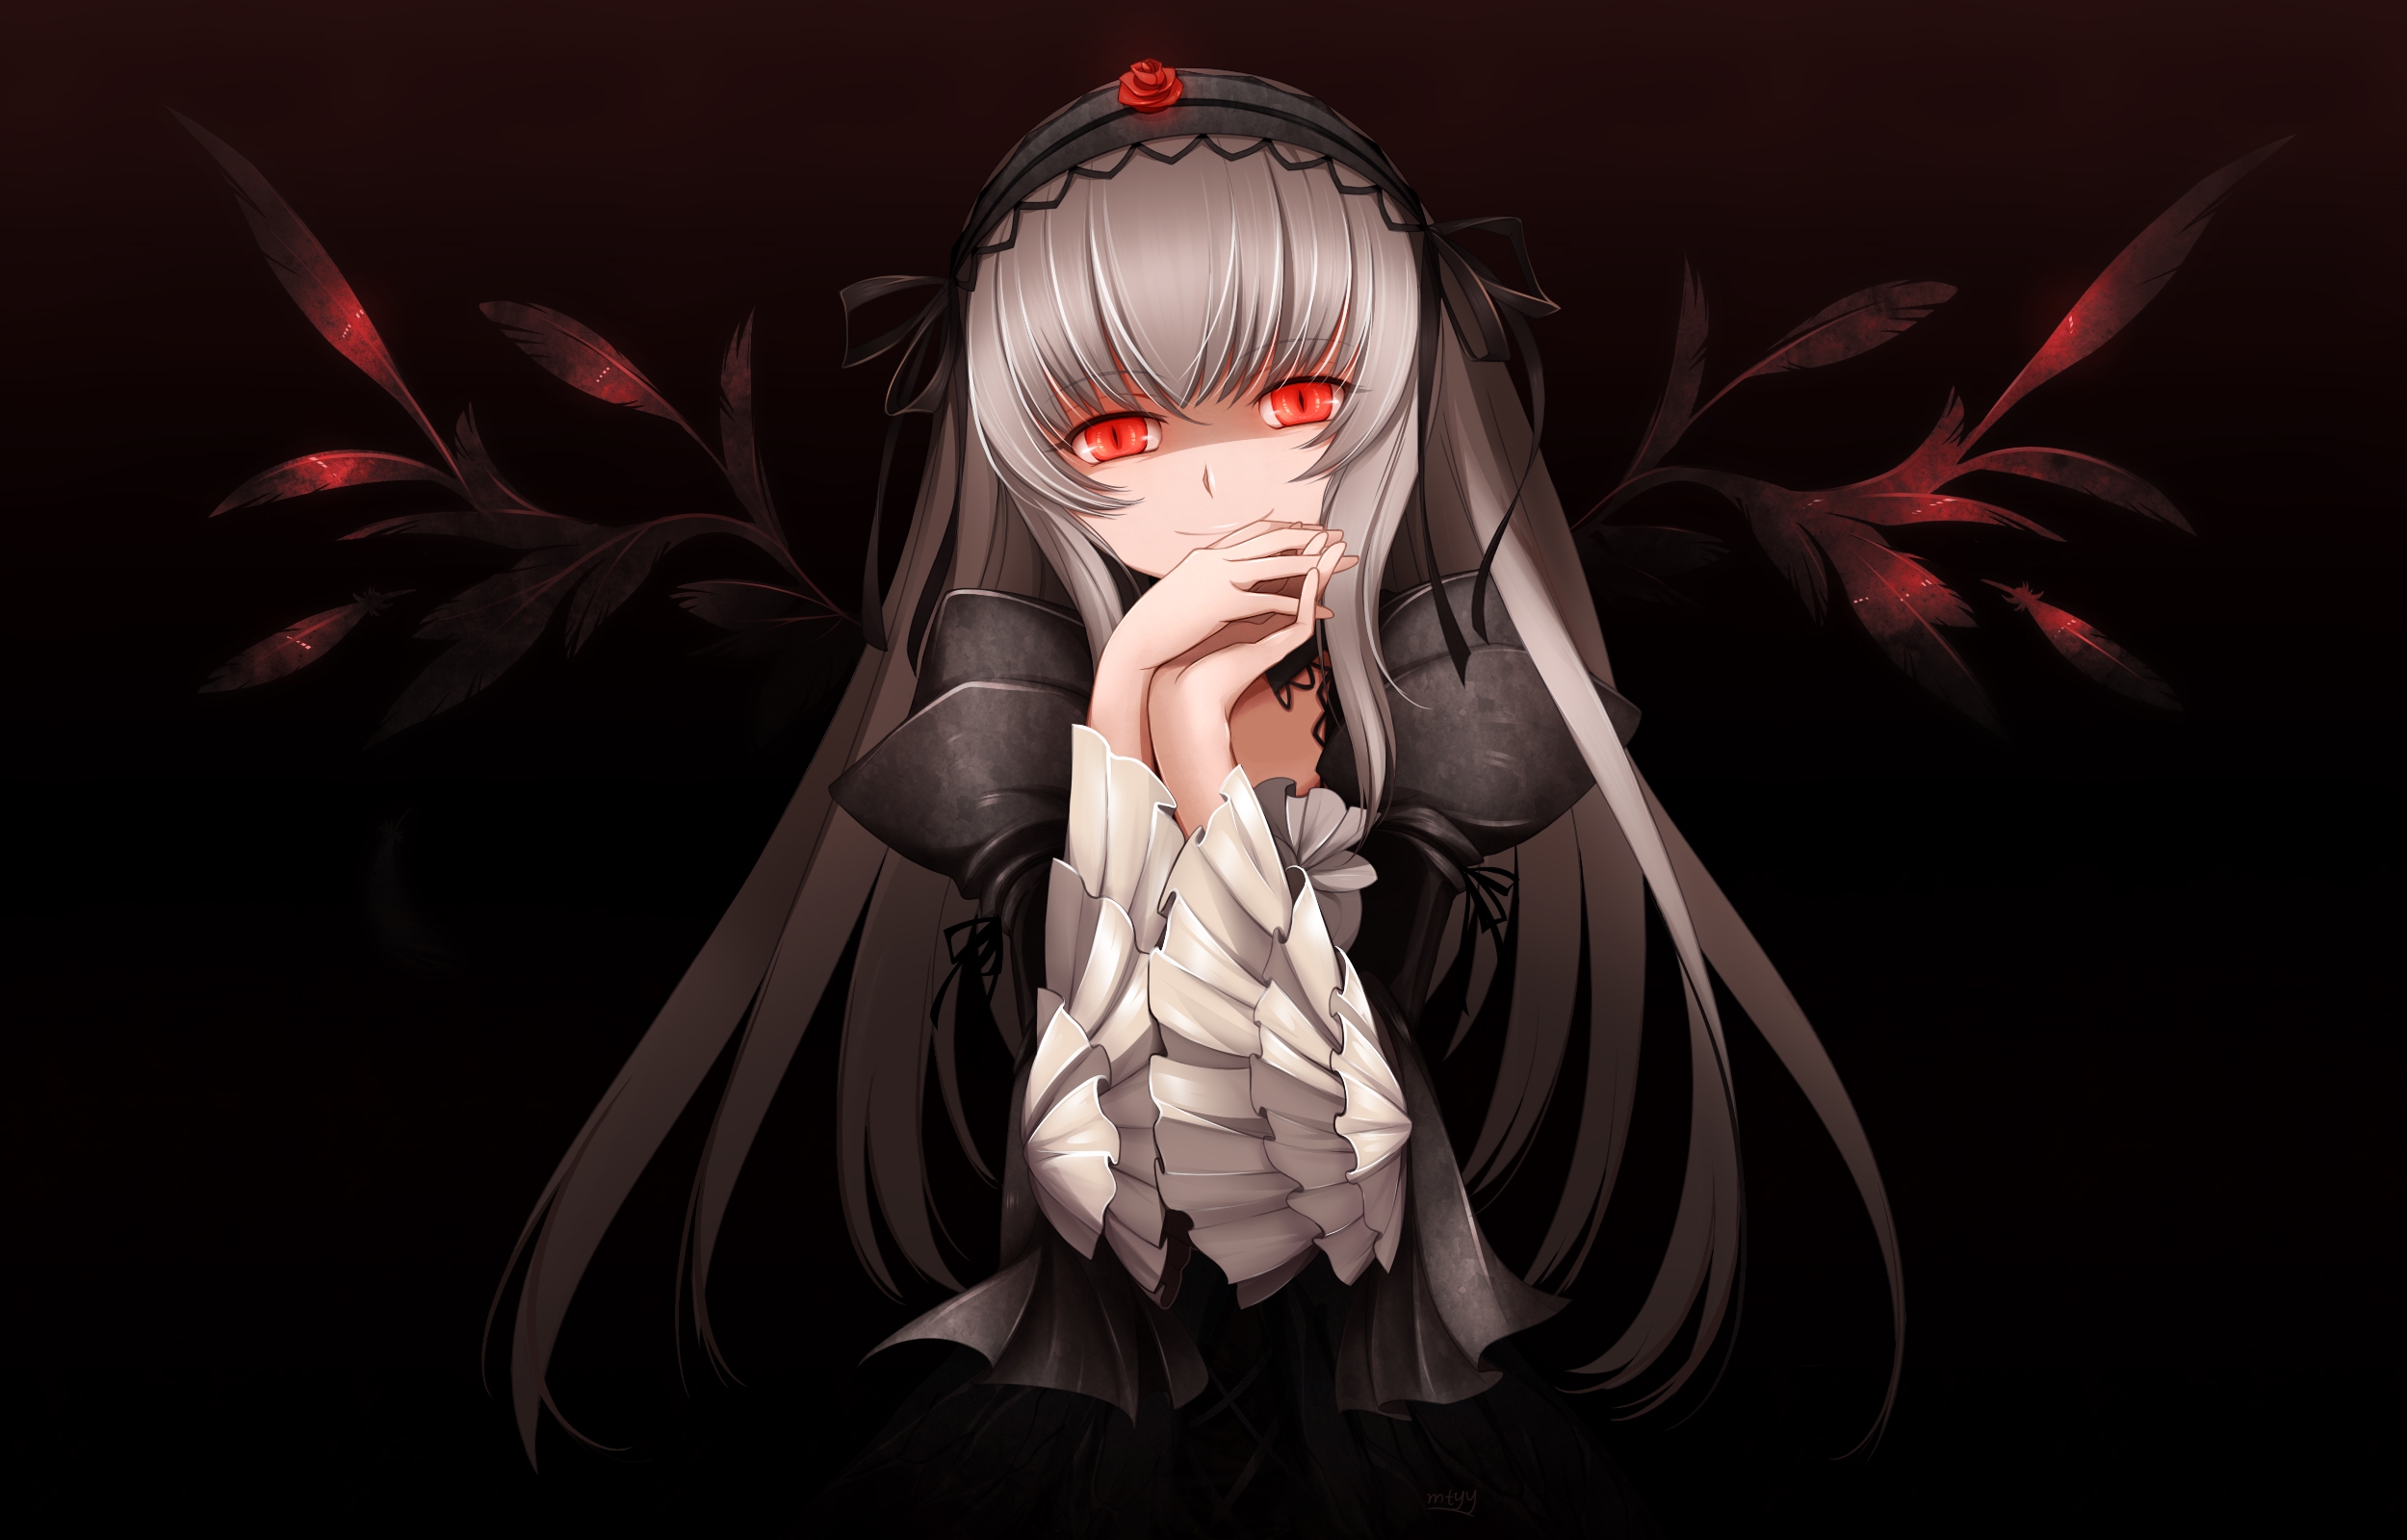 Download wallpaper 2500x1600 anime, girl, gothic, eyes, red HD background